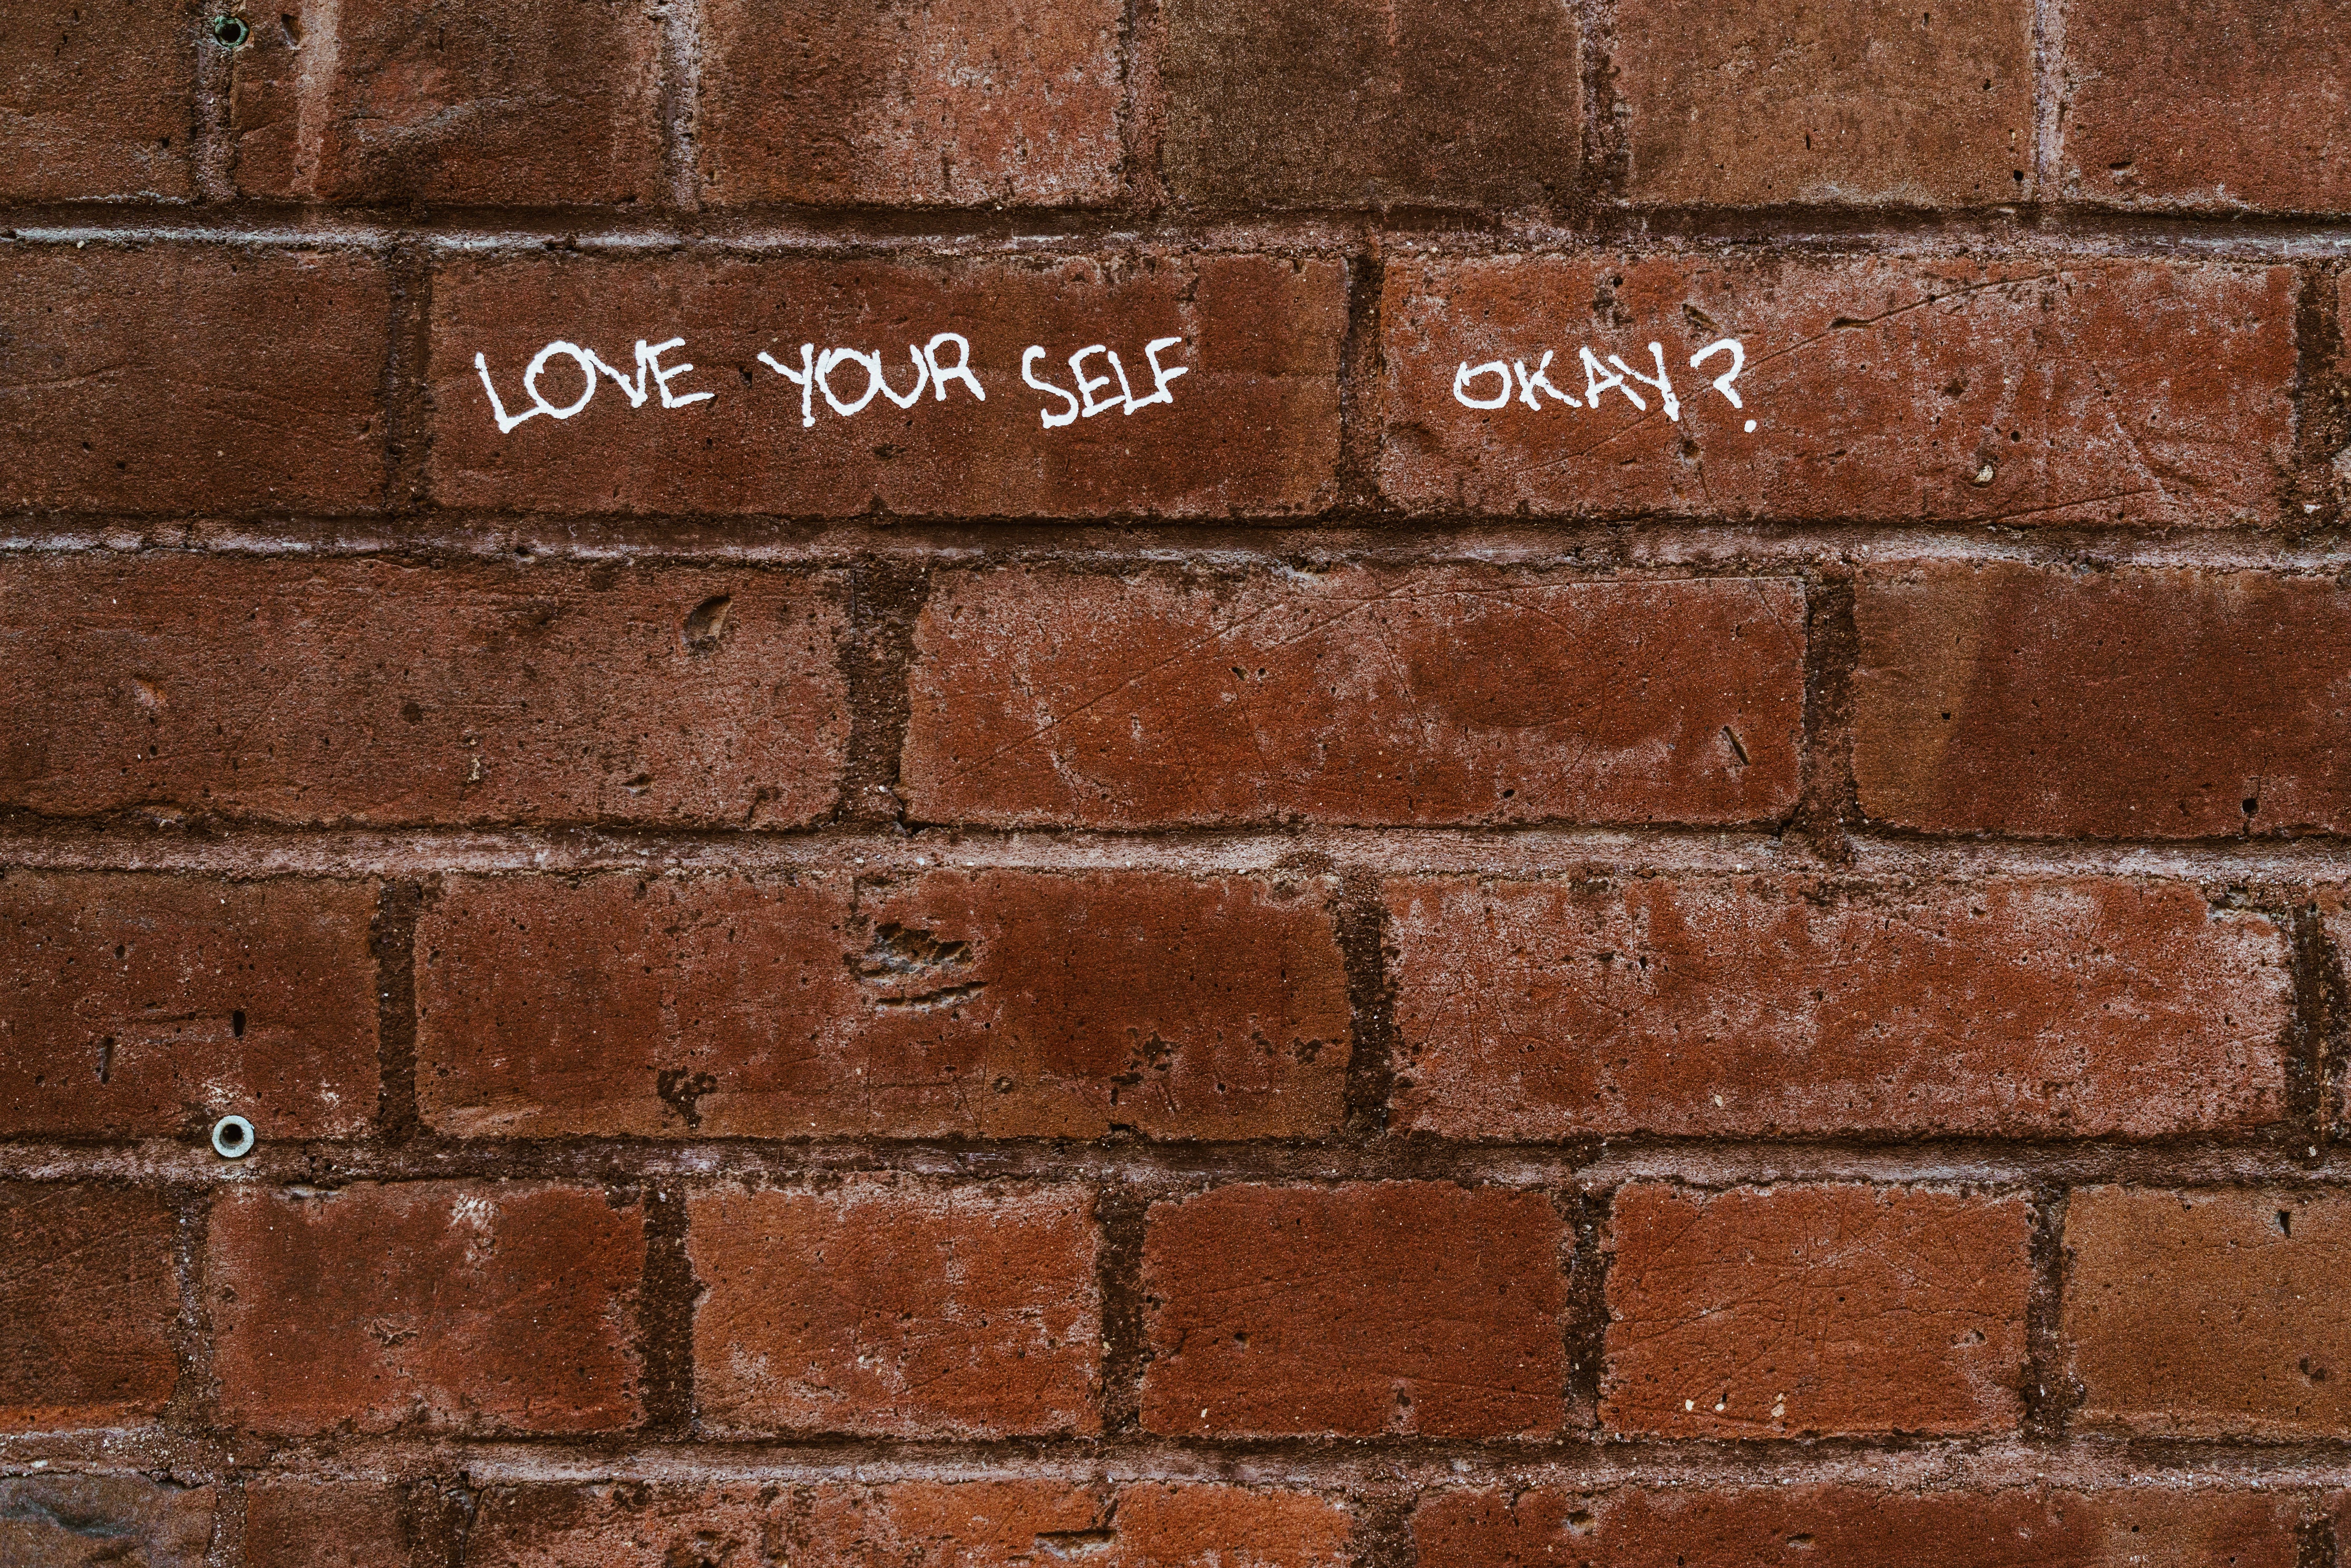 Brick wall with a message that reads "love yourself okay?"